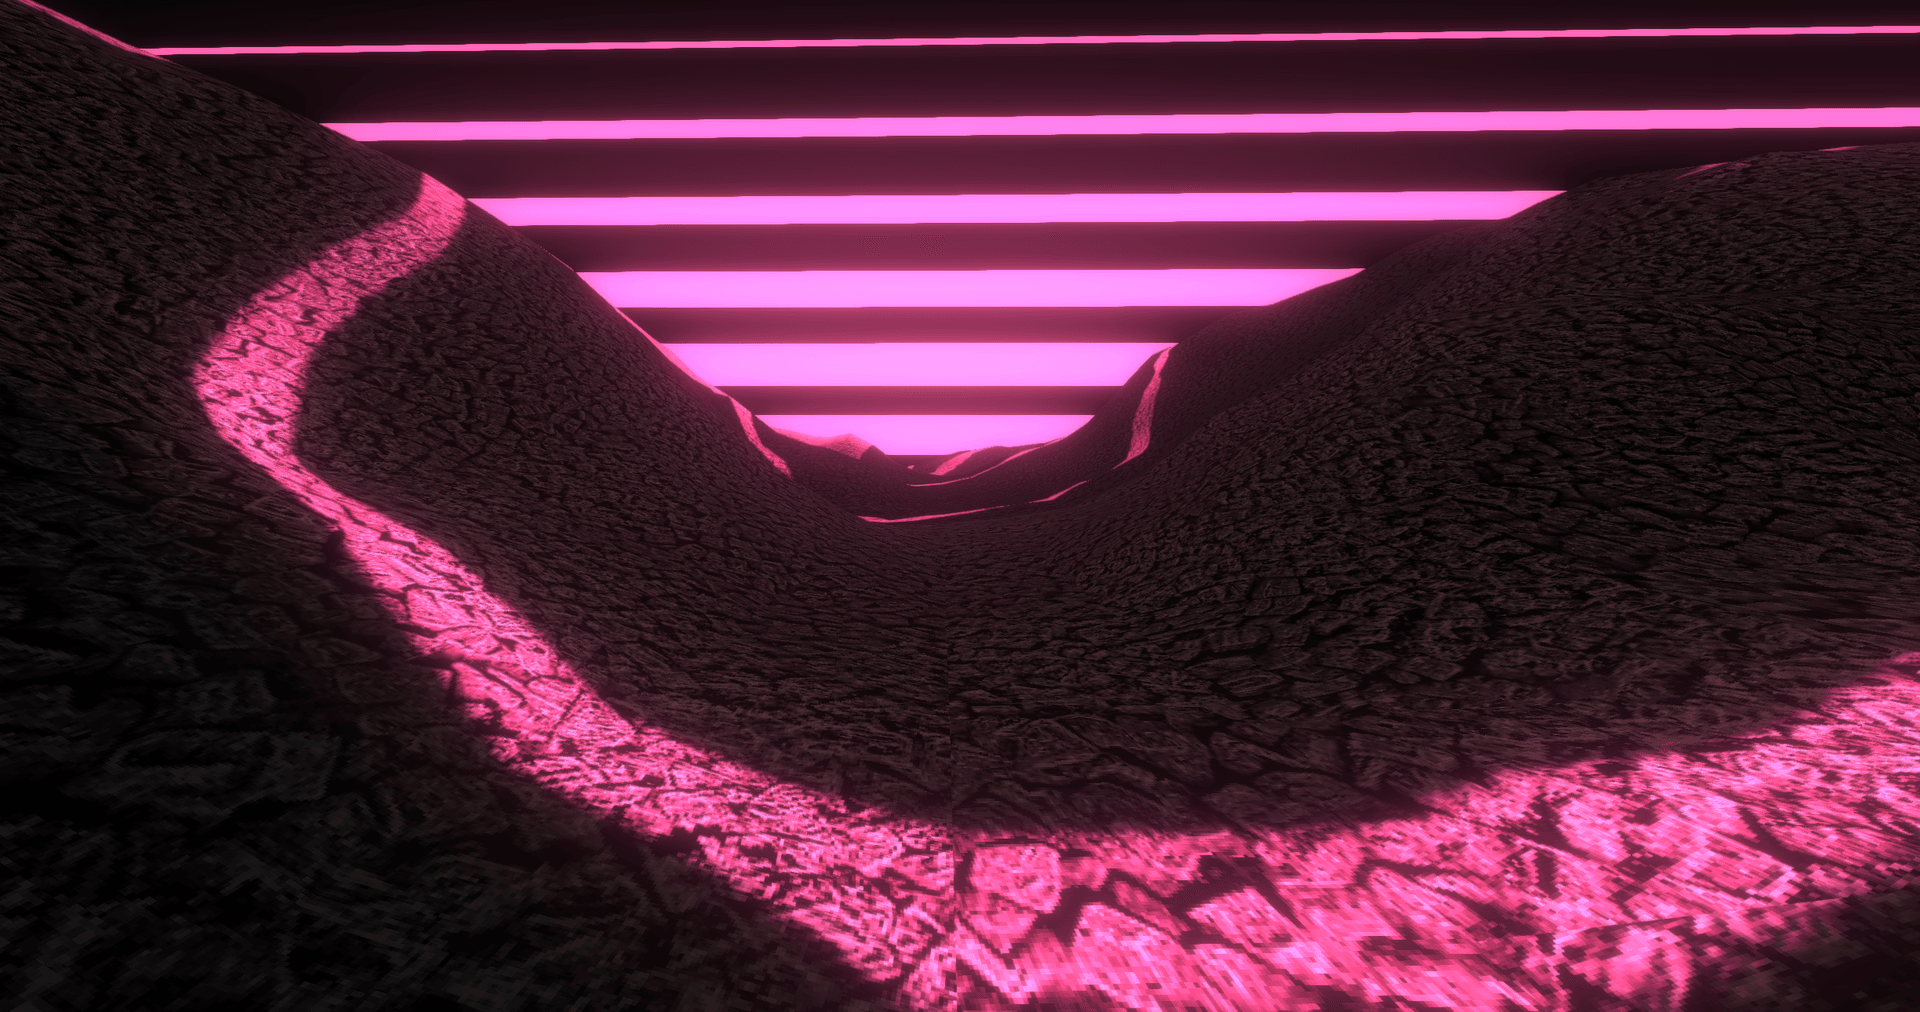 A screenshot of the pinklights scene.  It shows a bright panel in the background with dark slats over it which is casting long horizontal shadows over a rocky-looking pixelated ground.  There are some hills around the area and the camera is placed in a small valley.  It looks kind of like if you were inside a terrarium.